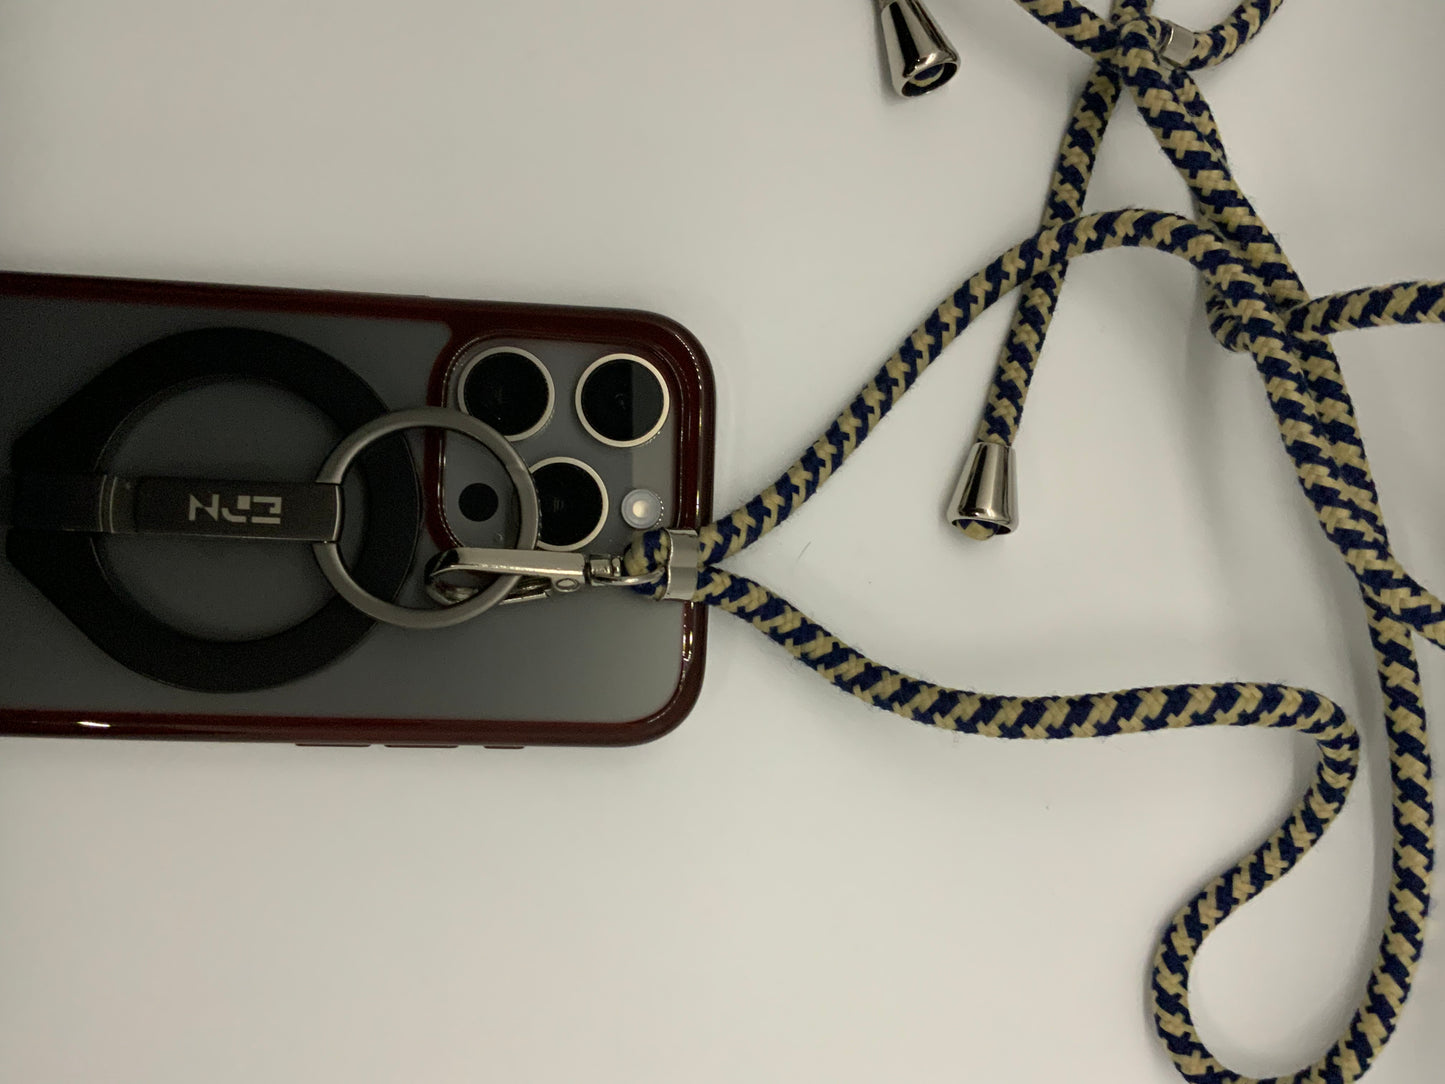 Be My AI: The picture shows a phone case with a strap attached to it. The phone case is burgundy in color and has a cutout for the camera and flash. Attached to the case is a circular ring holder with the letters "N2J" on it. The ring holder is attached to a strap that is made of a fabric material. The strap is braided and has a pattern of blue and beige colors. The strap also has metal aglets at the ends. The background of the picture is white.